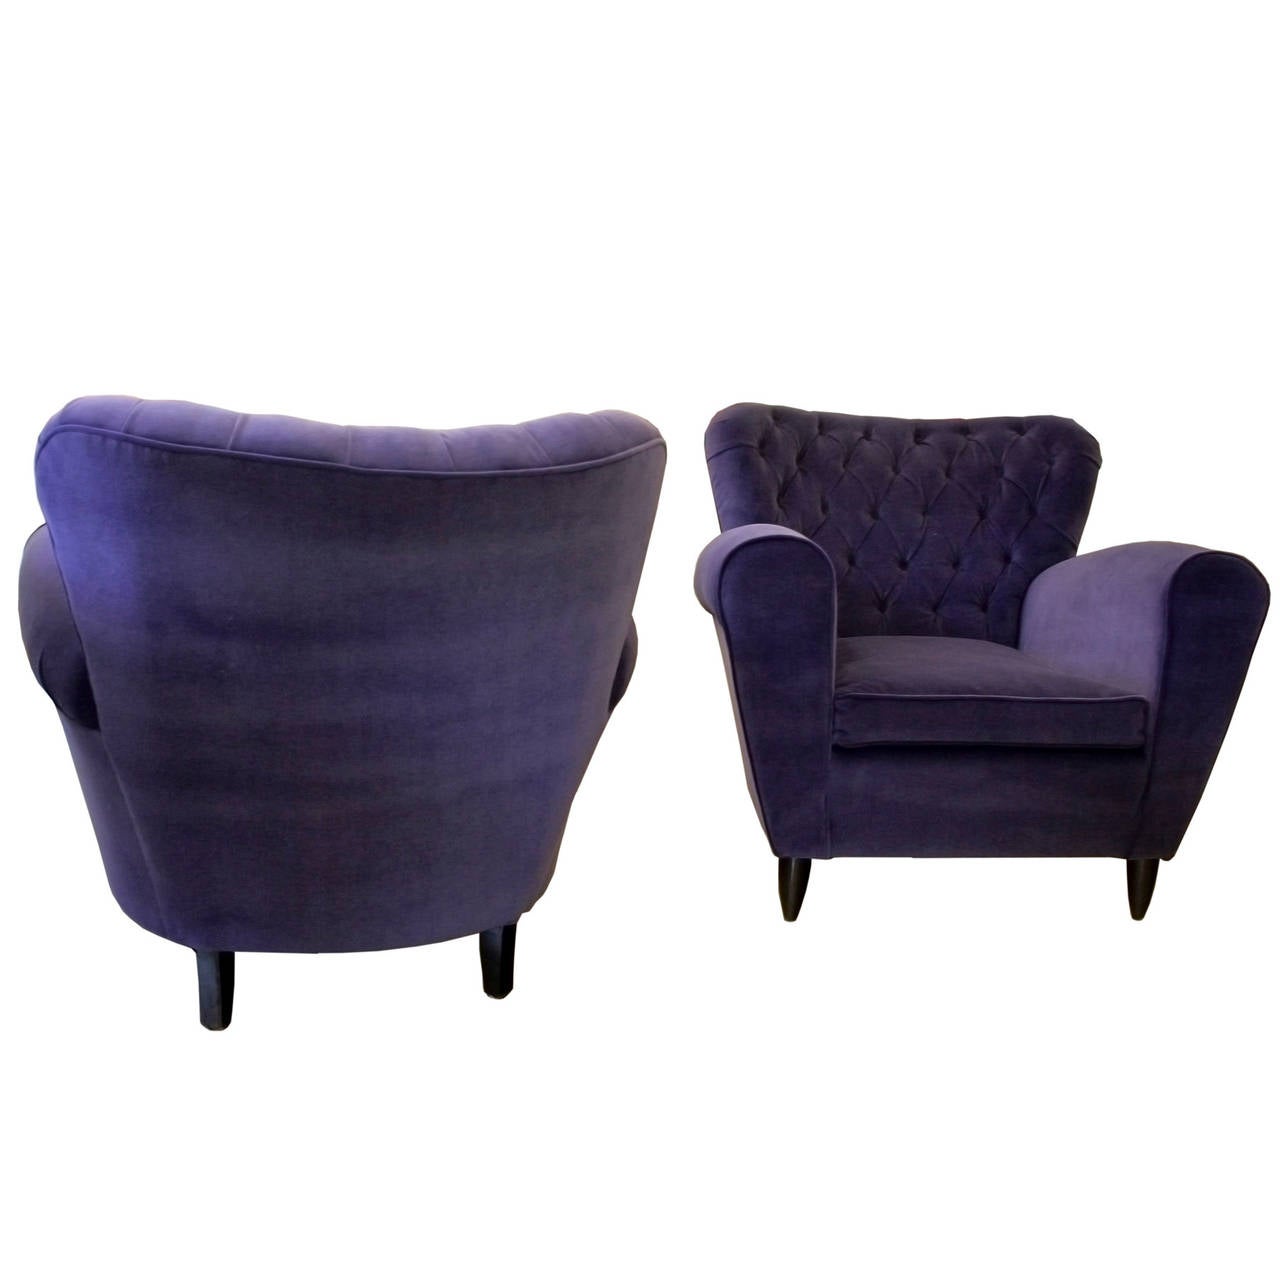 Pair of Armchairs in style of  Guglielmo Ulrich For Sale 1